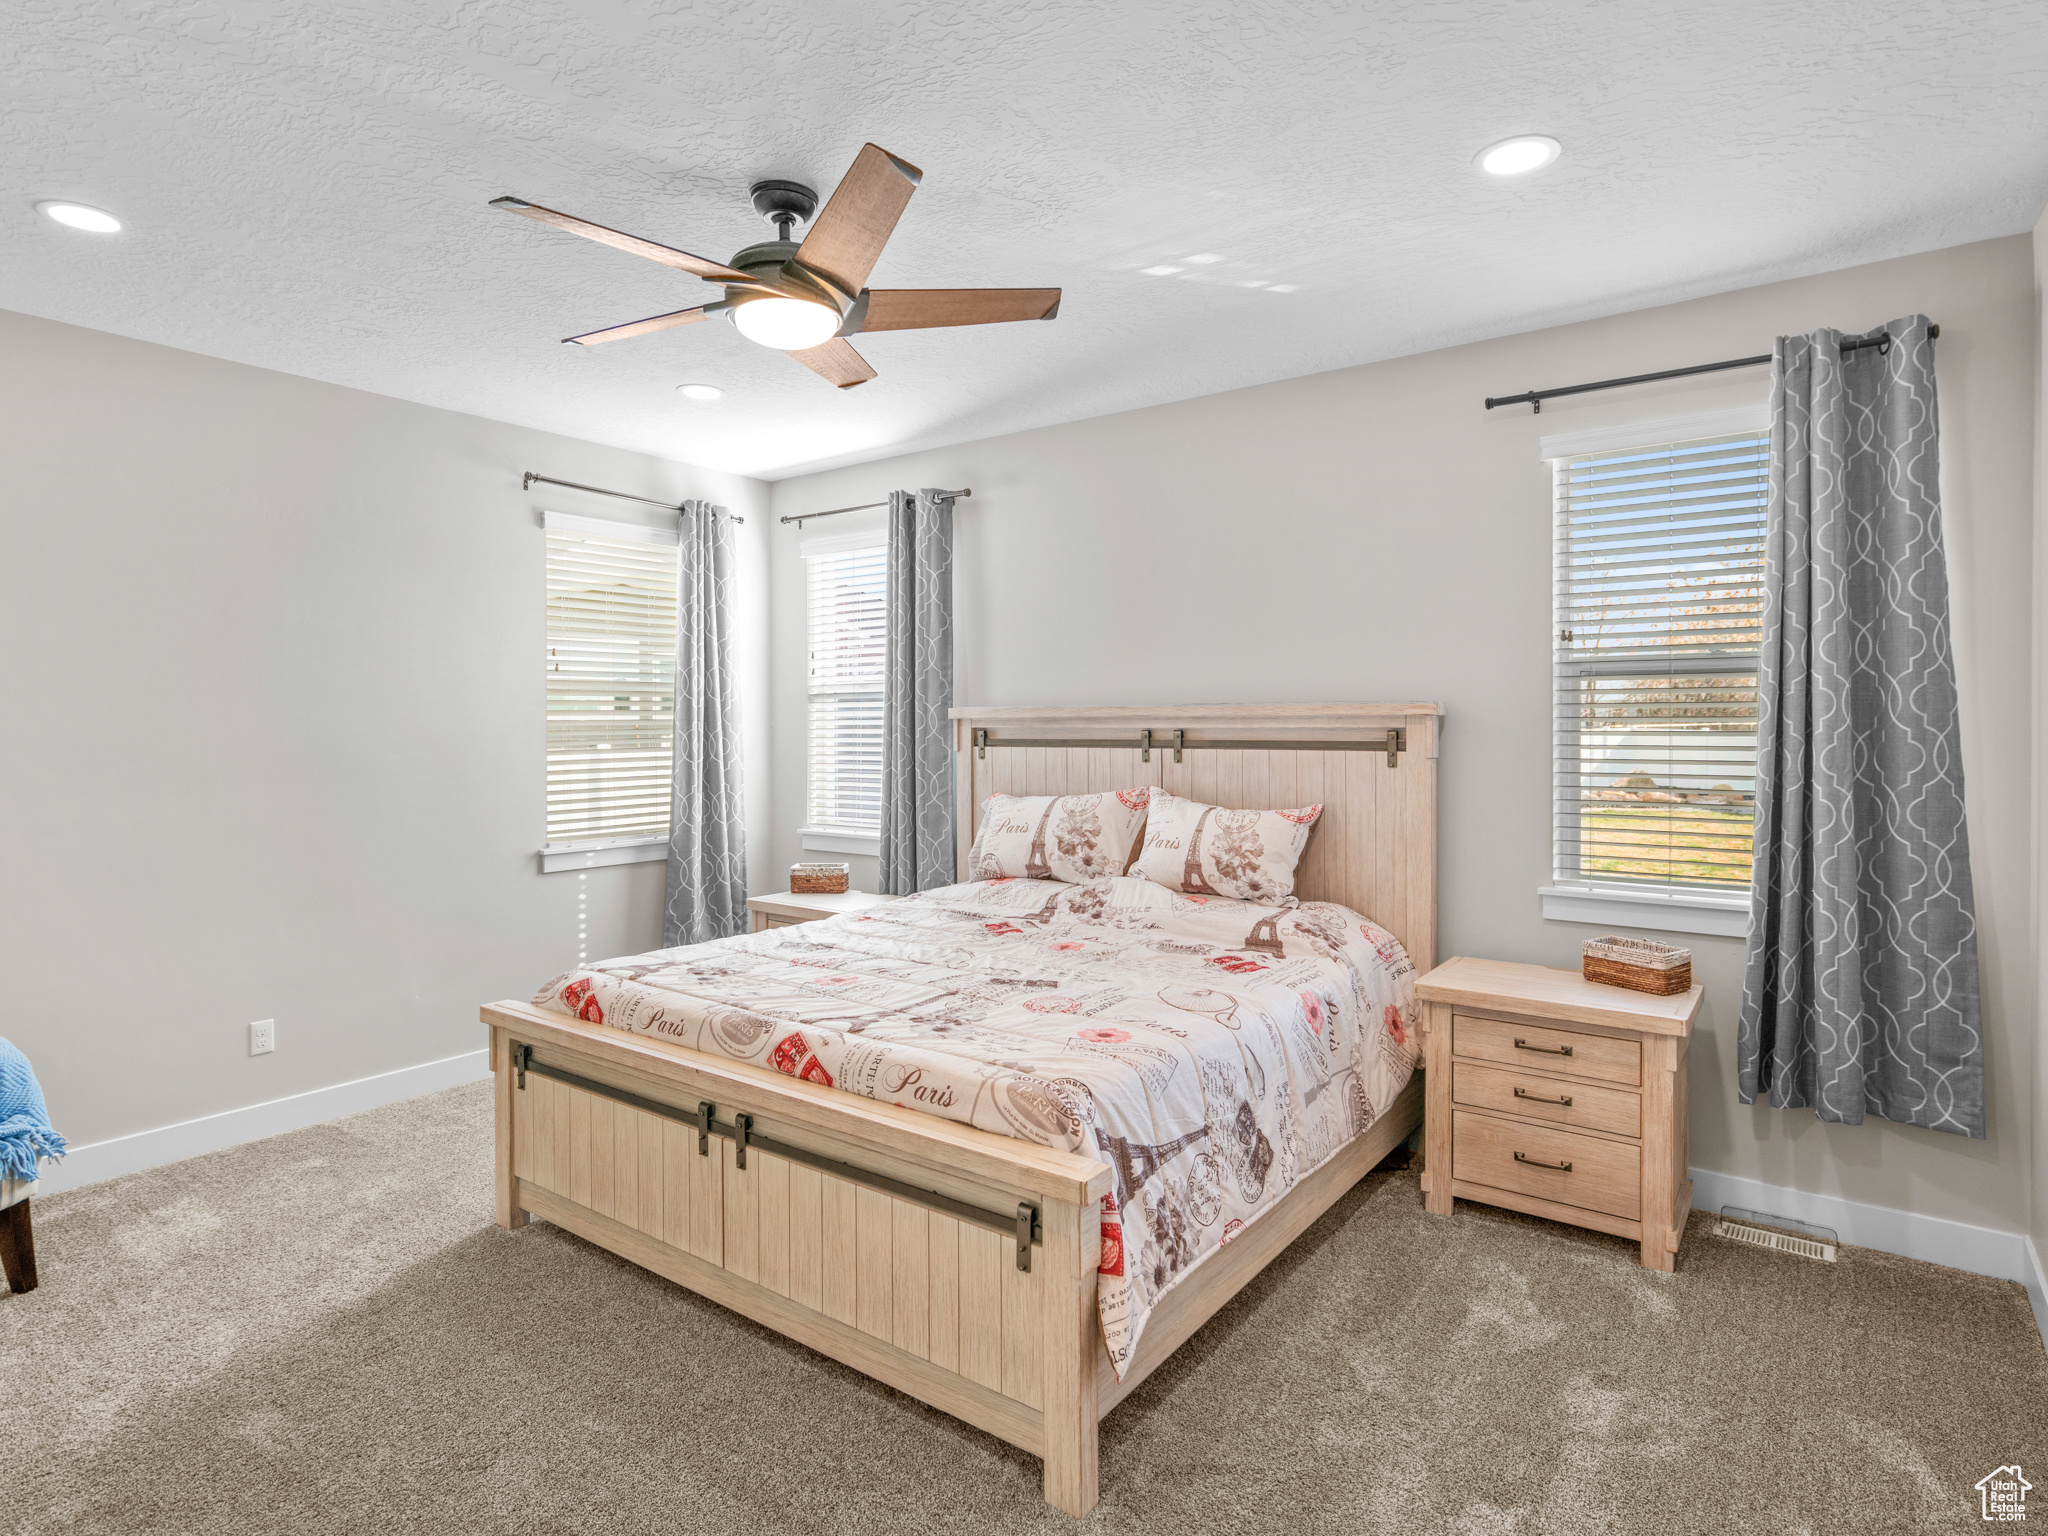 Carpeted bedroom with ceiling fan, a textured ceiling, and multiple windows